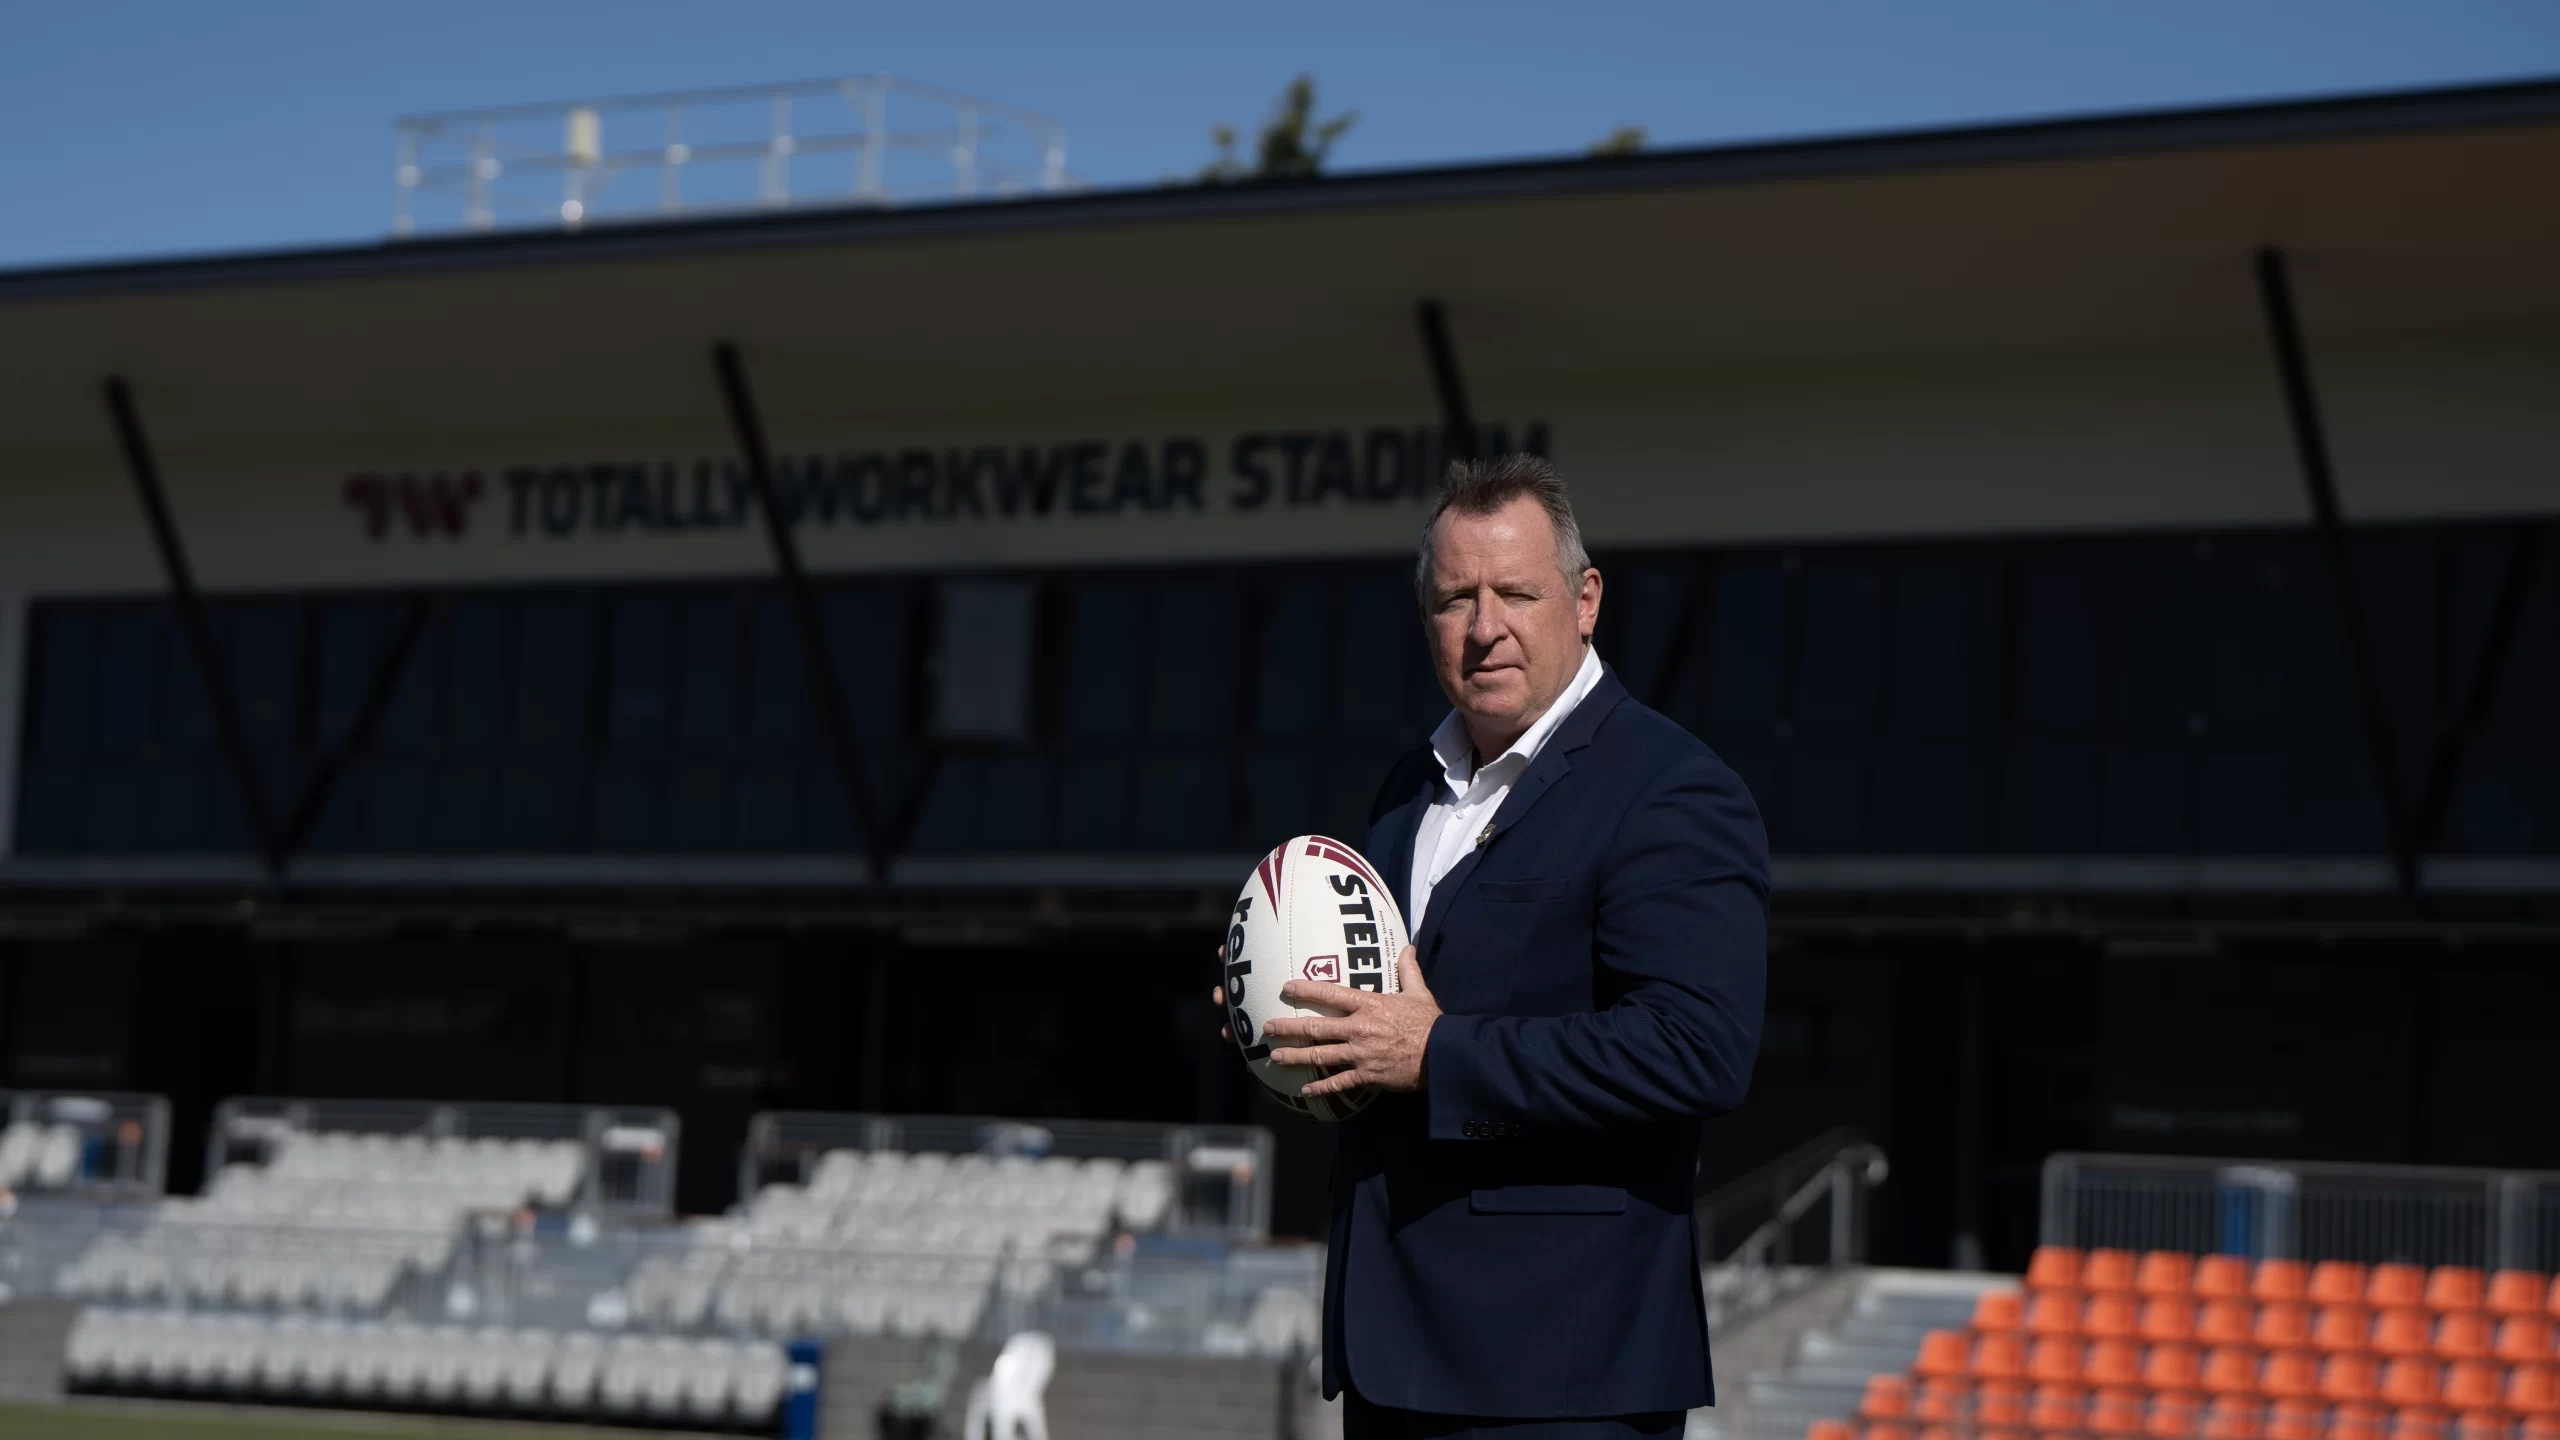 TORPY TO STEP DOWN AS TIGERS CEO